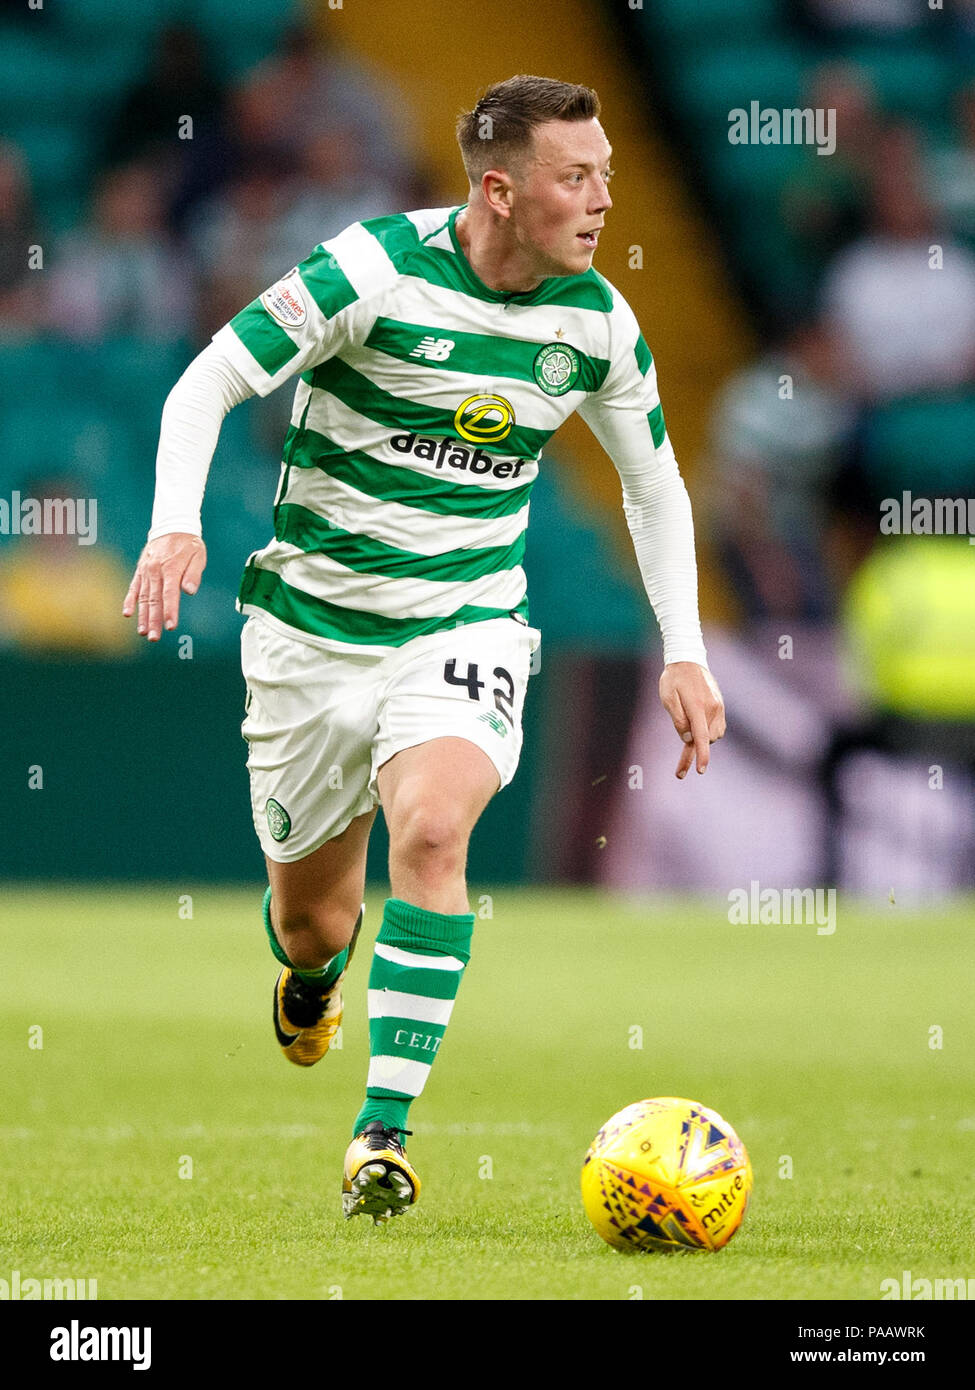 Celtic's Callum McGregor during the UEFA Champions League match at Celtic Park, Glasgow. PRESS ASSOCIATION Photo. Picture date: Wednesday July 18. 2017. See PA Story SOCCER Celtic. Photo credit should read: Robert Parry/PA Wire. Stock Photo